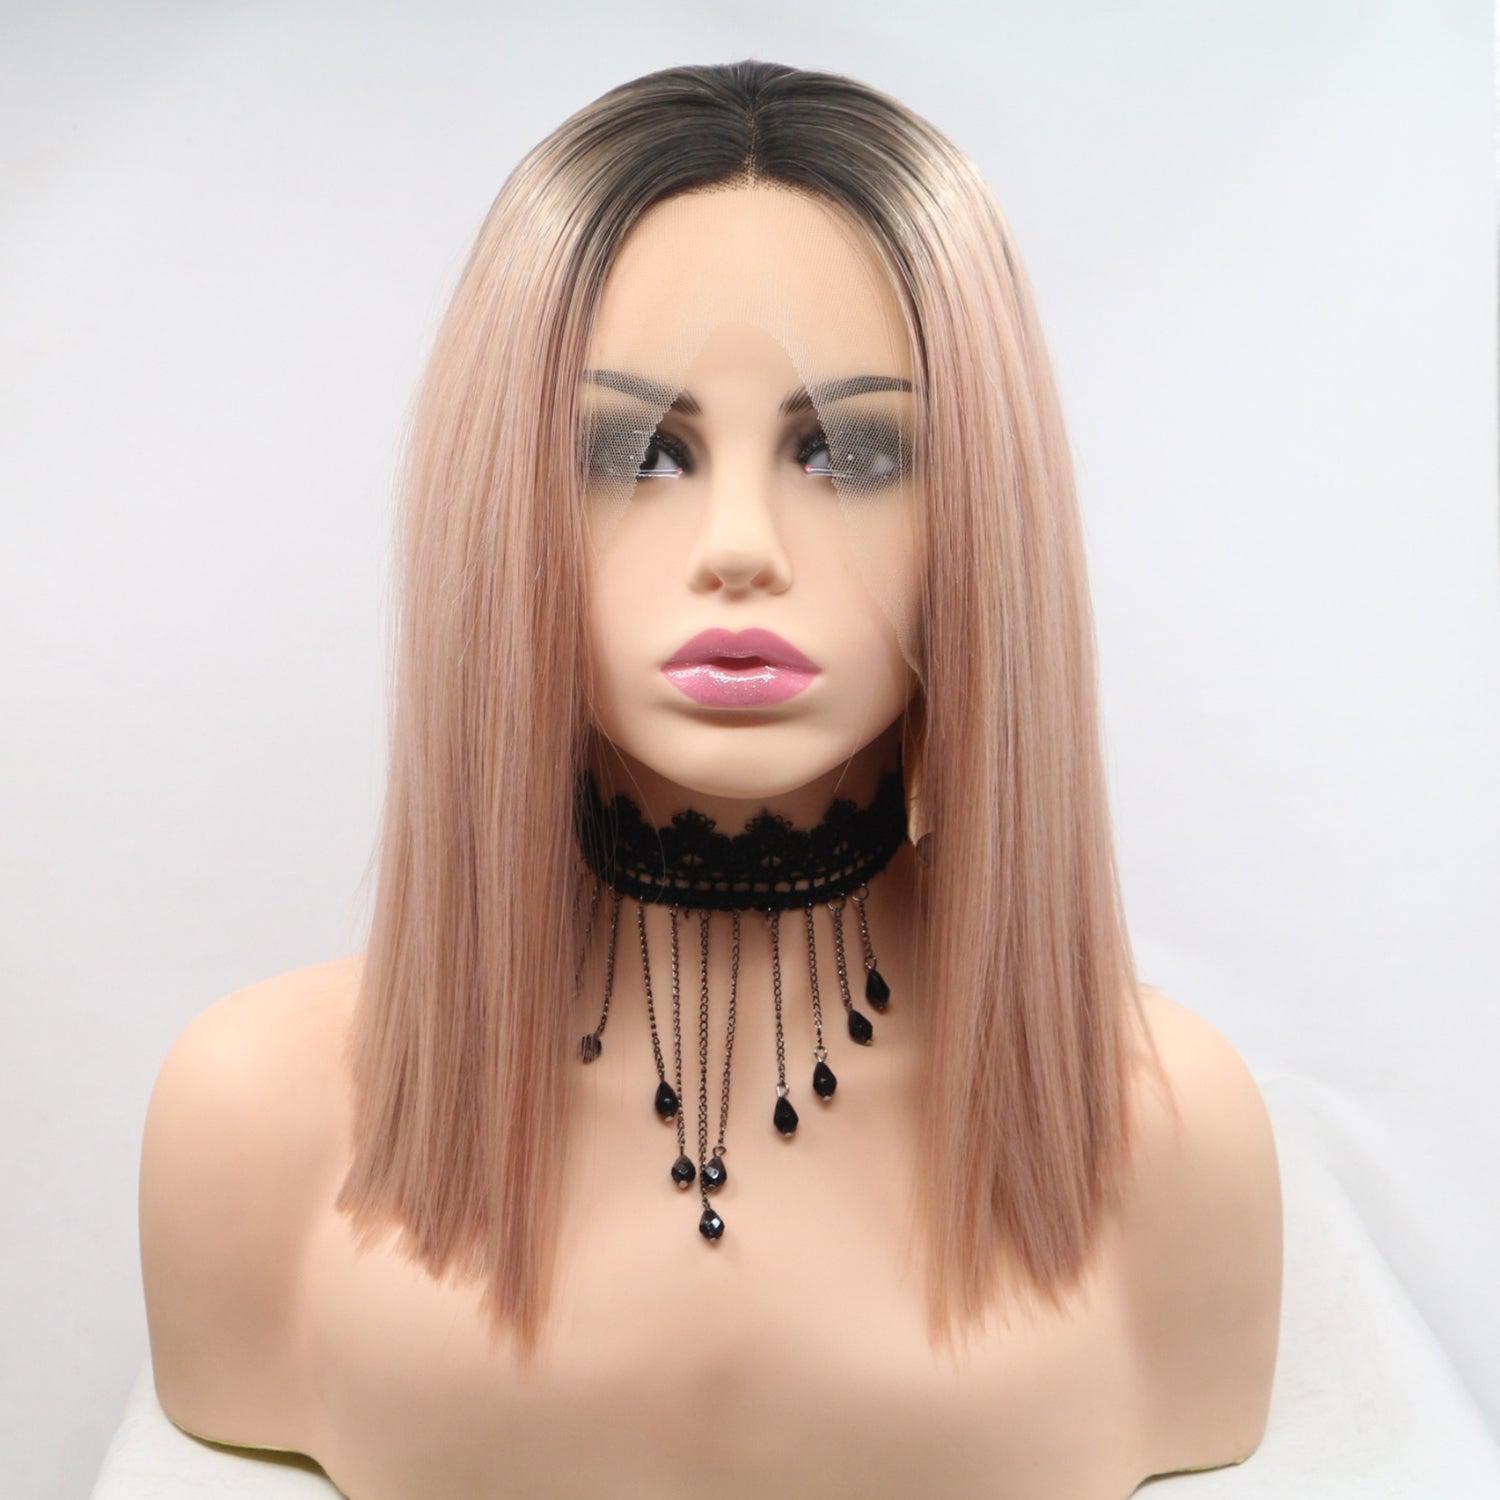 a mannequin head with a necklace and choker